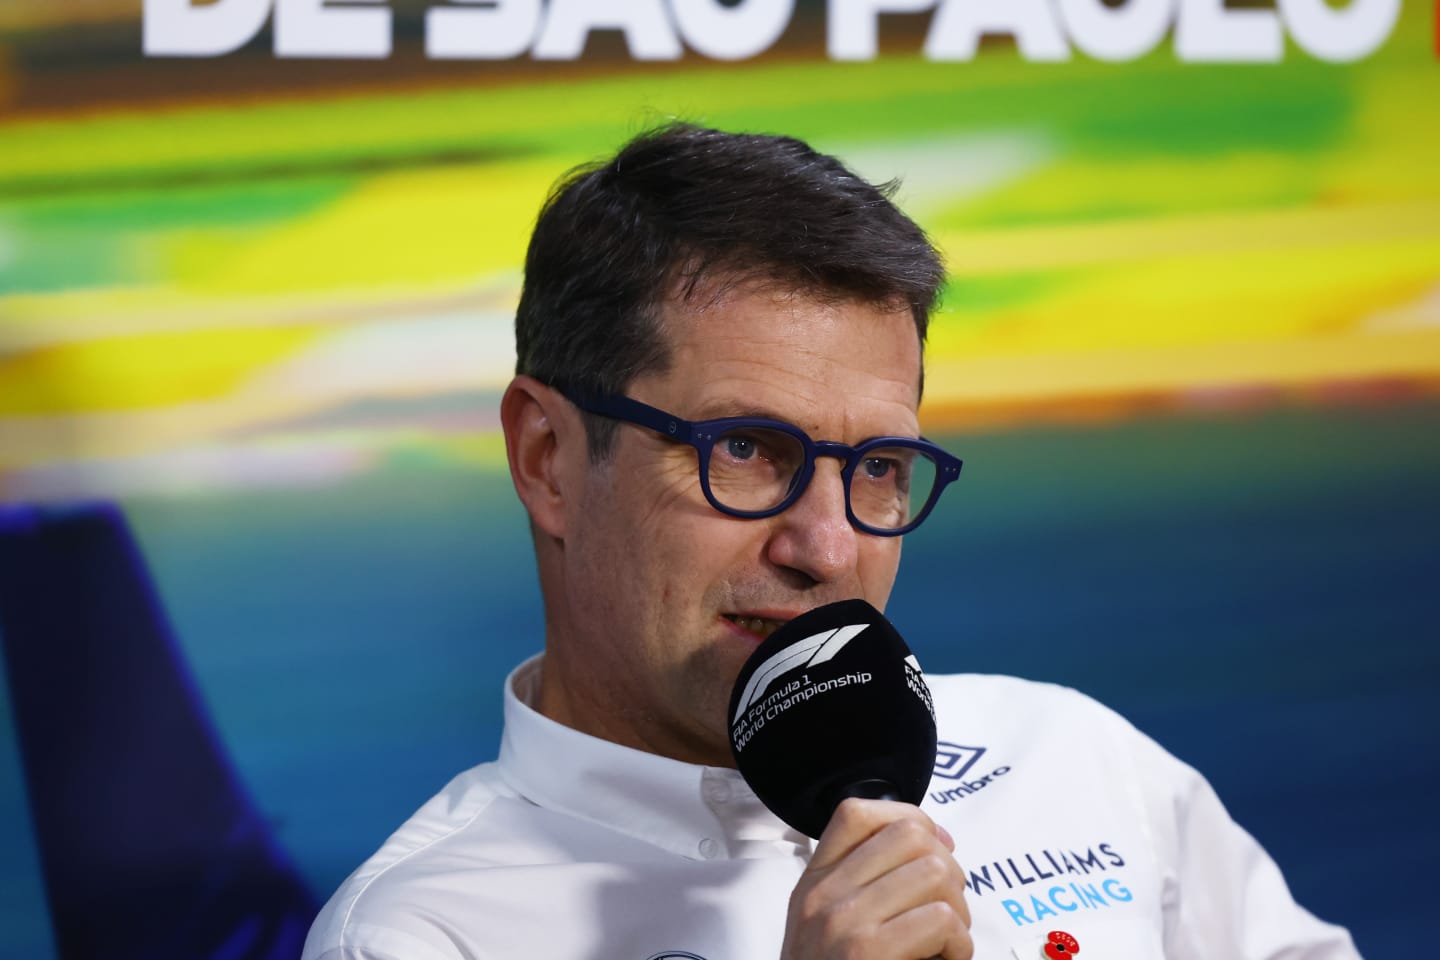 SAO PAULO, BRAZIL - NOVEMBER 12: Francois-Xavier Demaison, Technical Director of Williams attends a press conference prior to practice ahead of the F1 Grand Prix of Brazil at Autodromo Jose Carlos Pace on November 12, 2022 in Sao Paulo, Brazil. (Photo by Bryn Lennon/Getty Images)